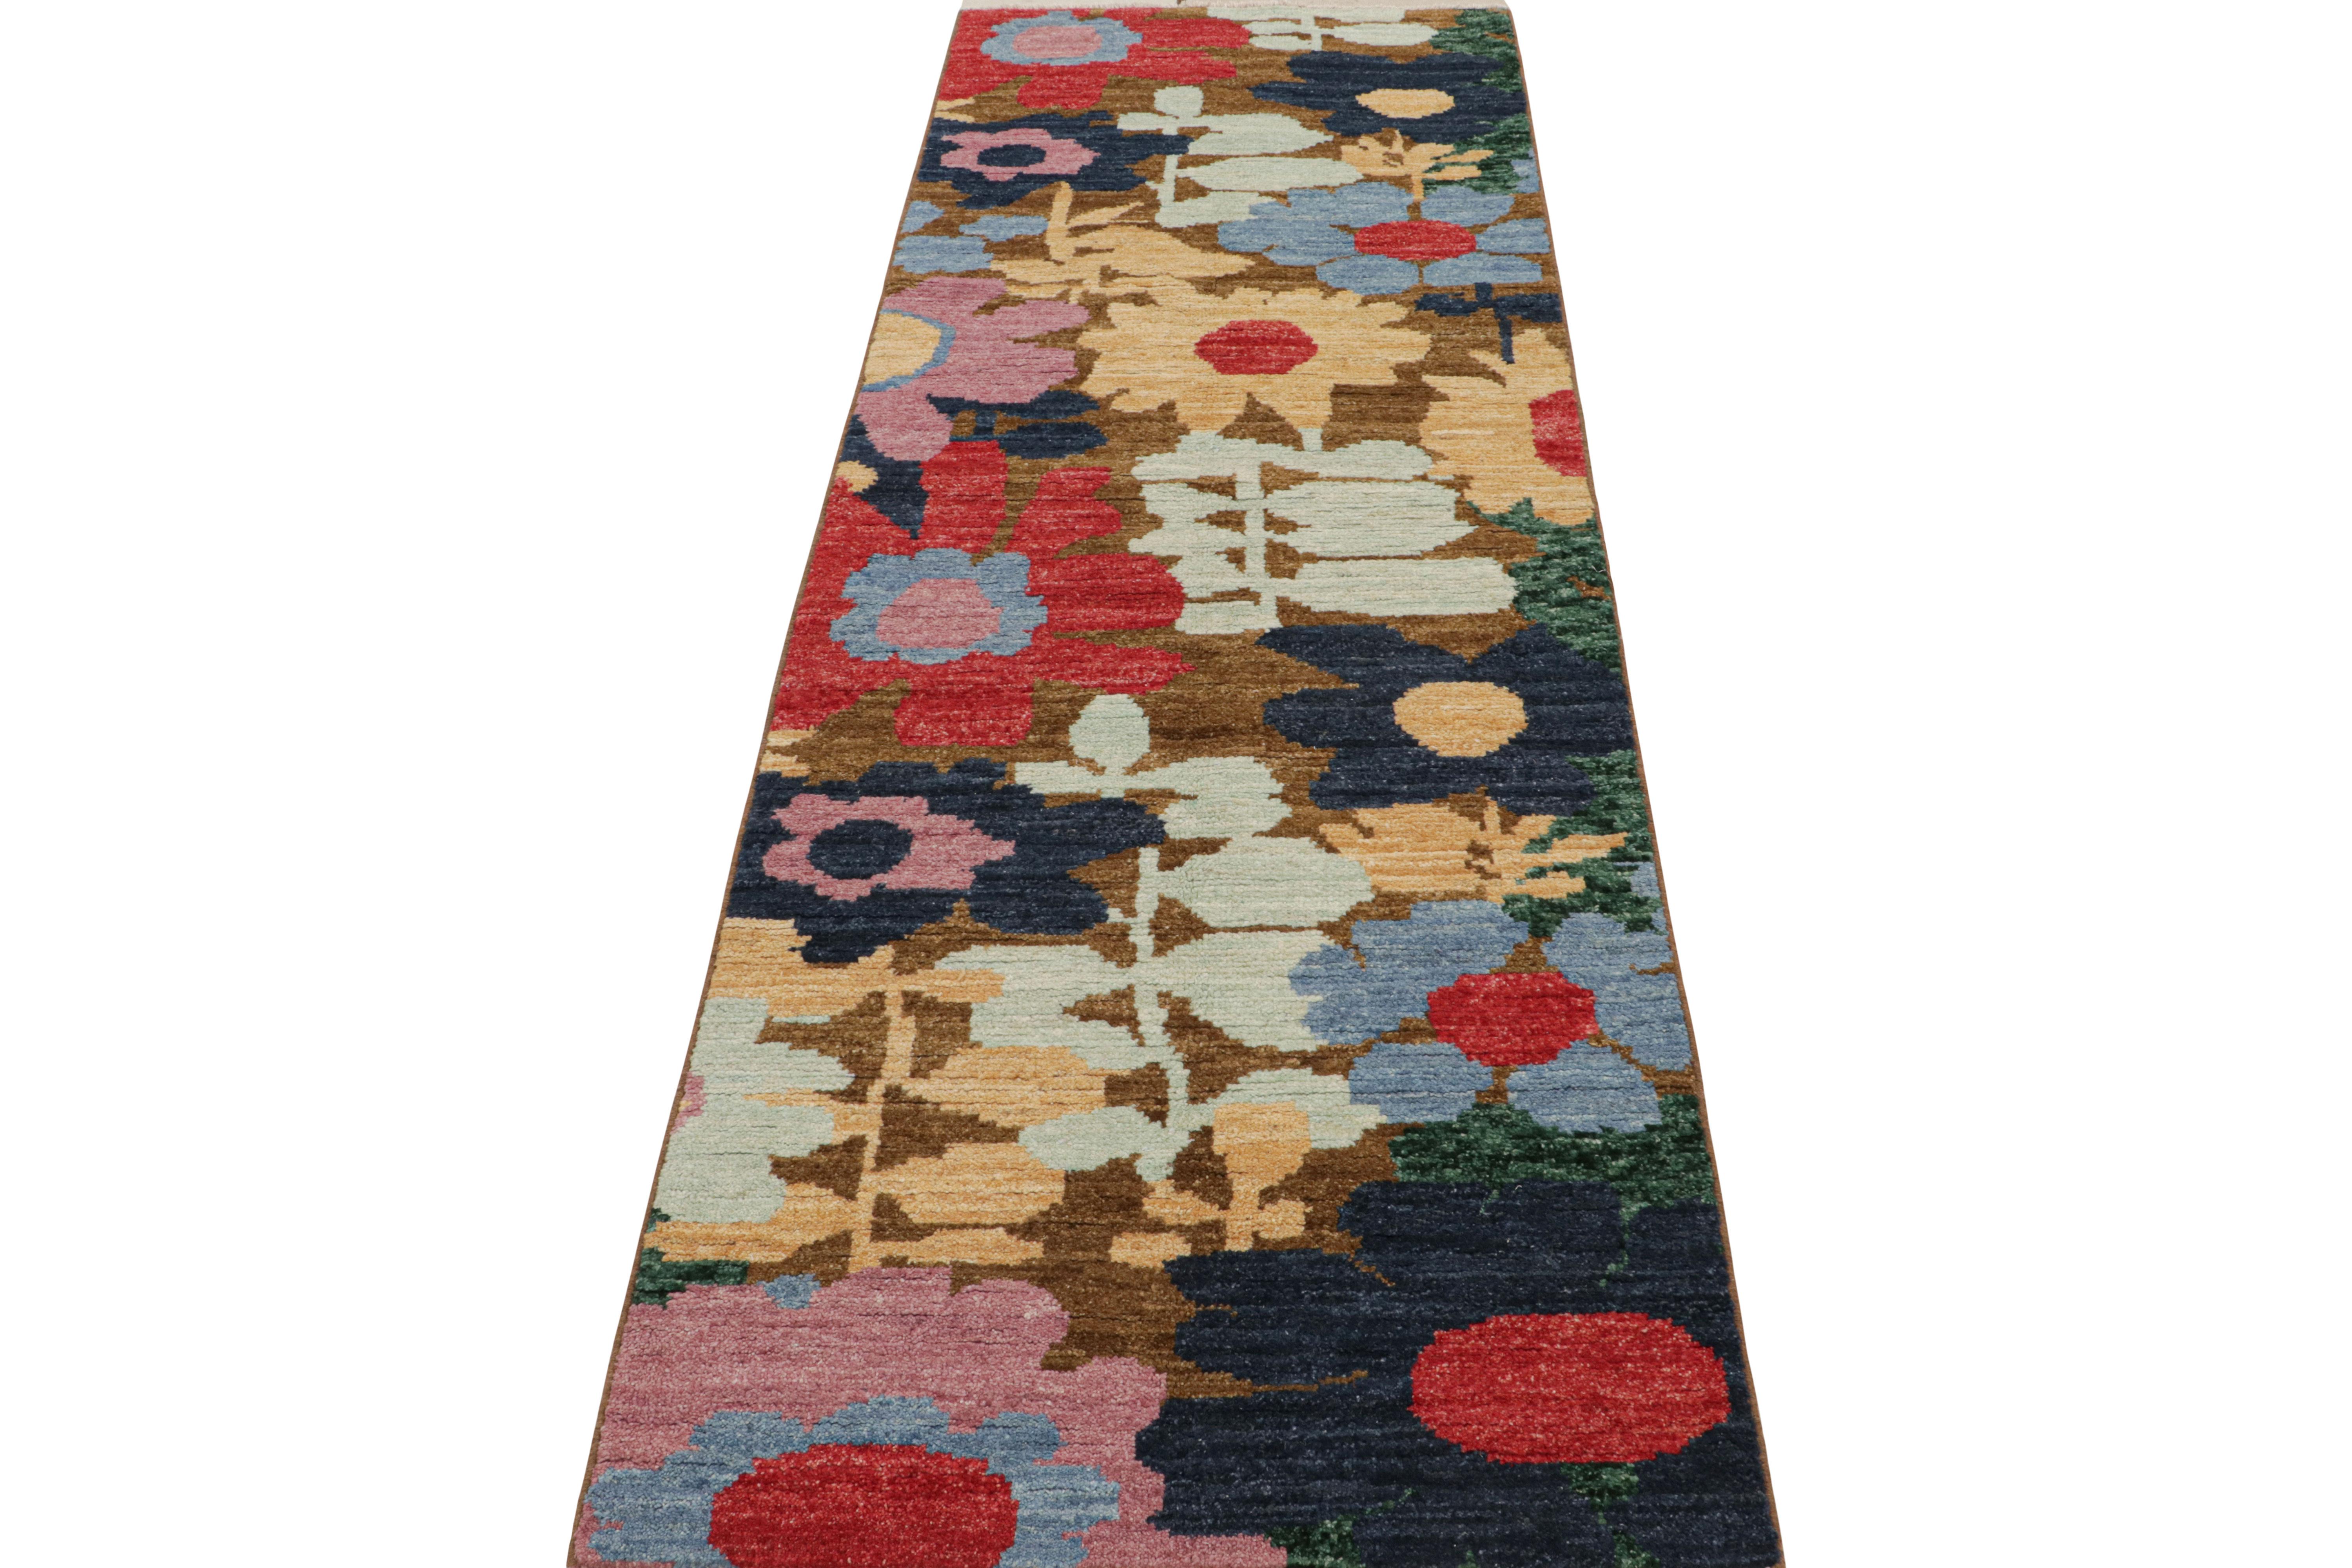 This contemporary 3x8 runner rug is an exciting new addition to Rug & Kilim’s Modern rug collection. Hand-knotted in wool, its design is a bold abstract take on botanical designs.

On the Design: 

This particular design uses polychromatic colors in